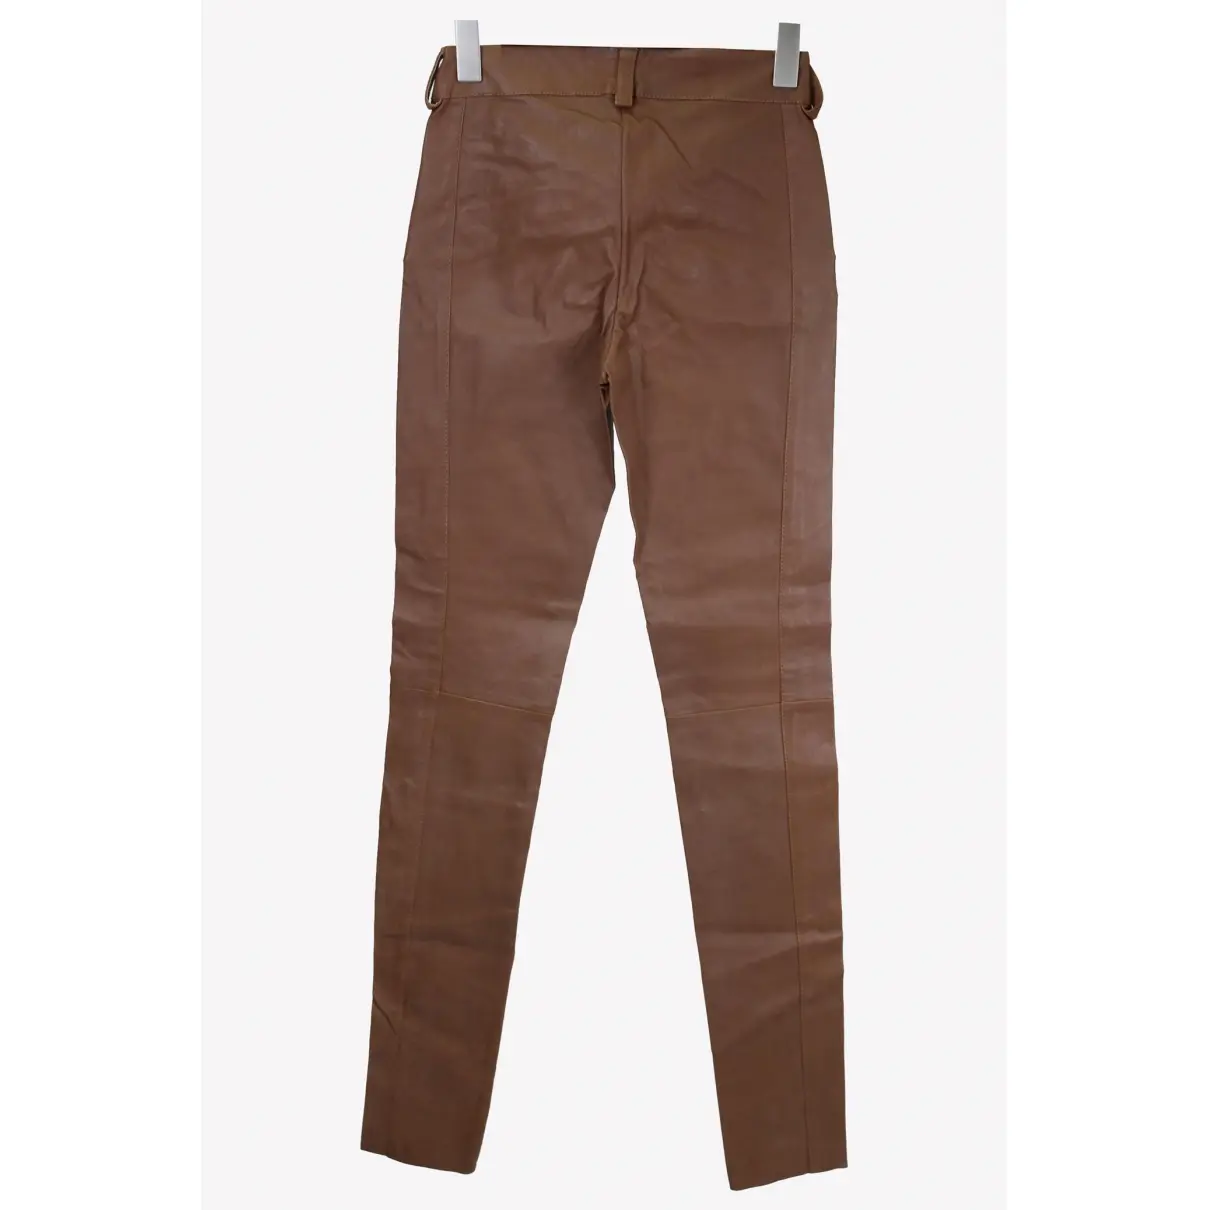 Buy Gestuz Leather trousers online